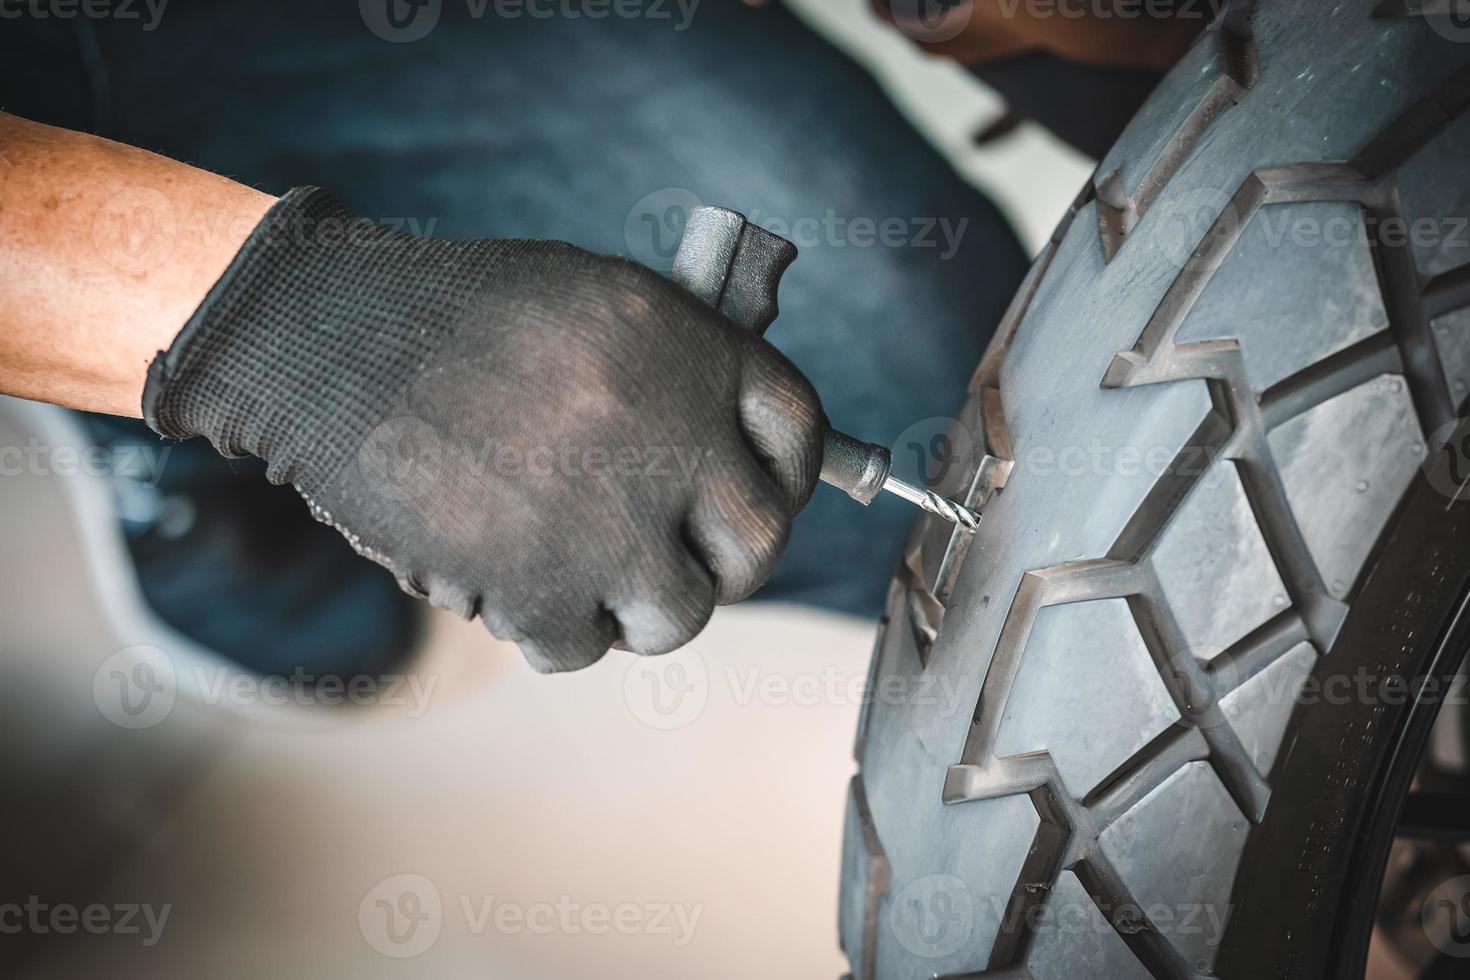 Rider use a tire plug kit and trying to fix a hole in tire's sidewall ,Repair a motorcycle flat tire in the garage. motorcycle maintenance and repair concept photo